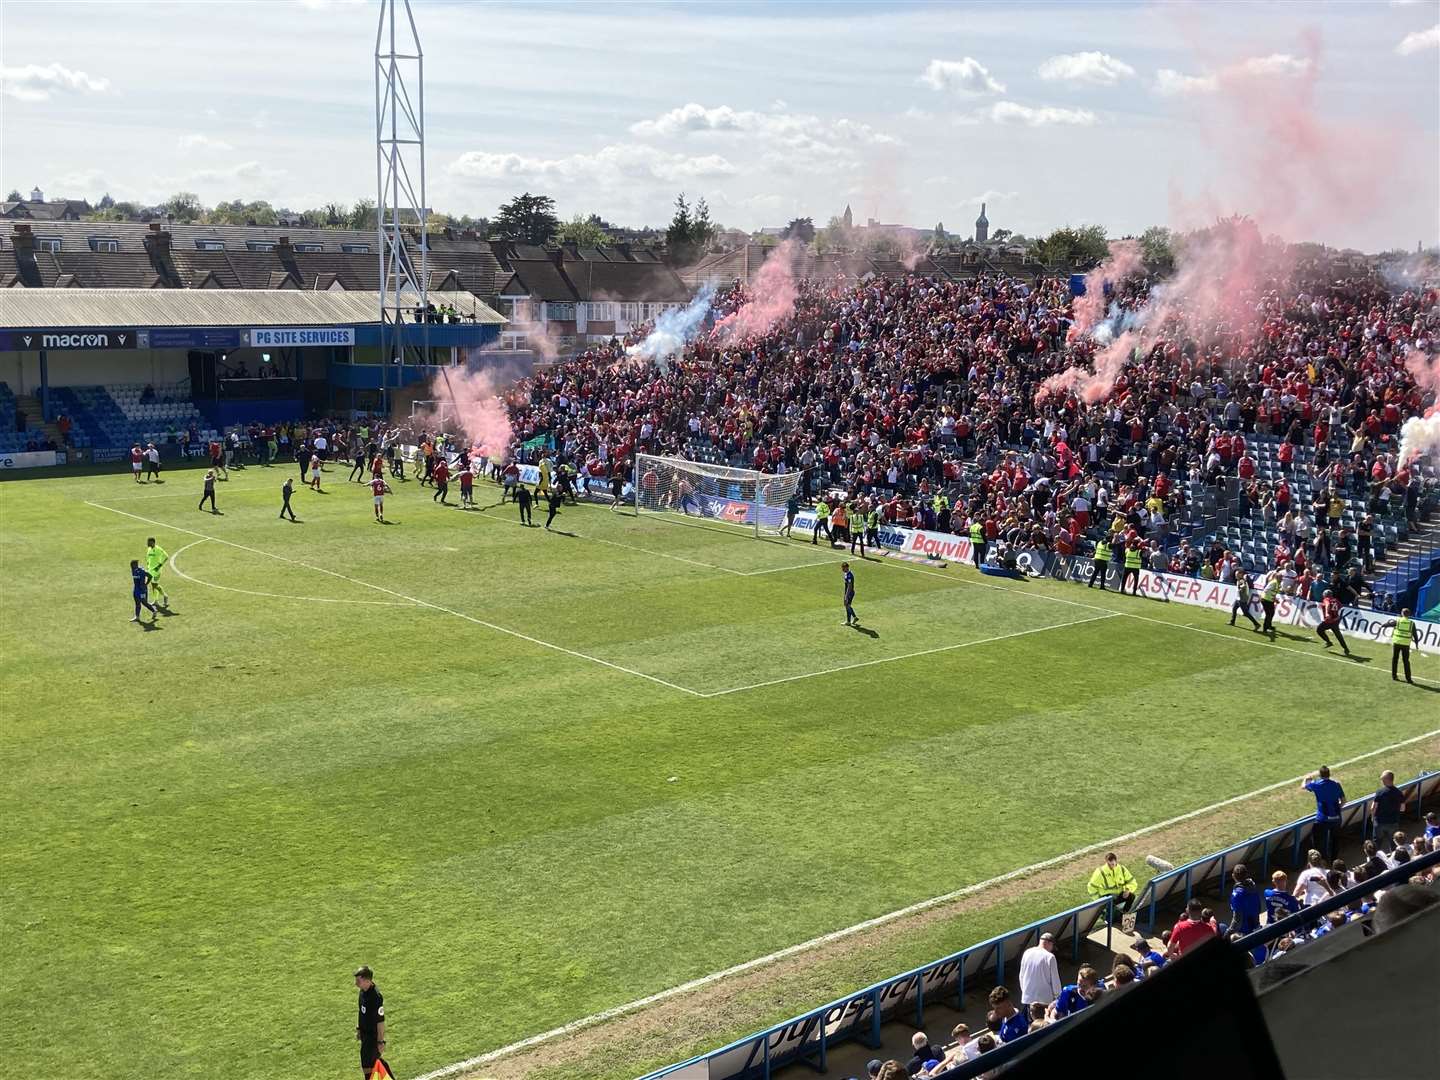 Rotherham United celebrate their second goal at Priestfield with flares set off in the stand and fans on the pitch